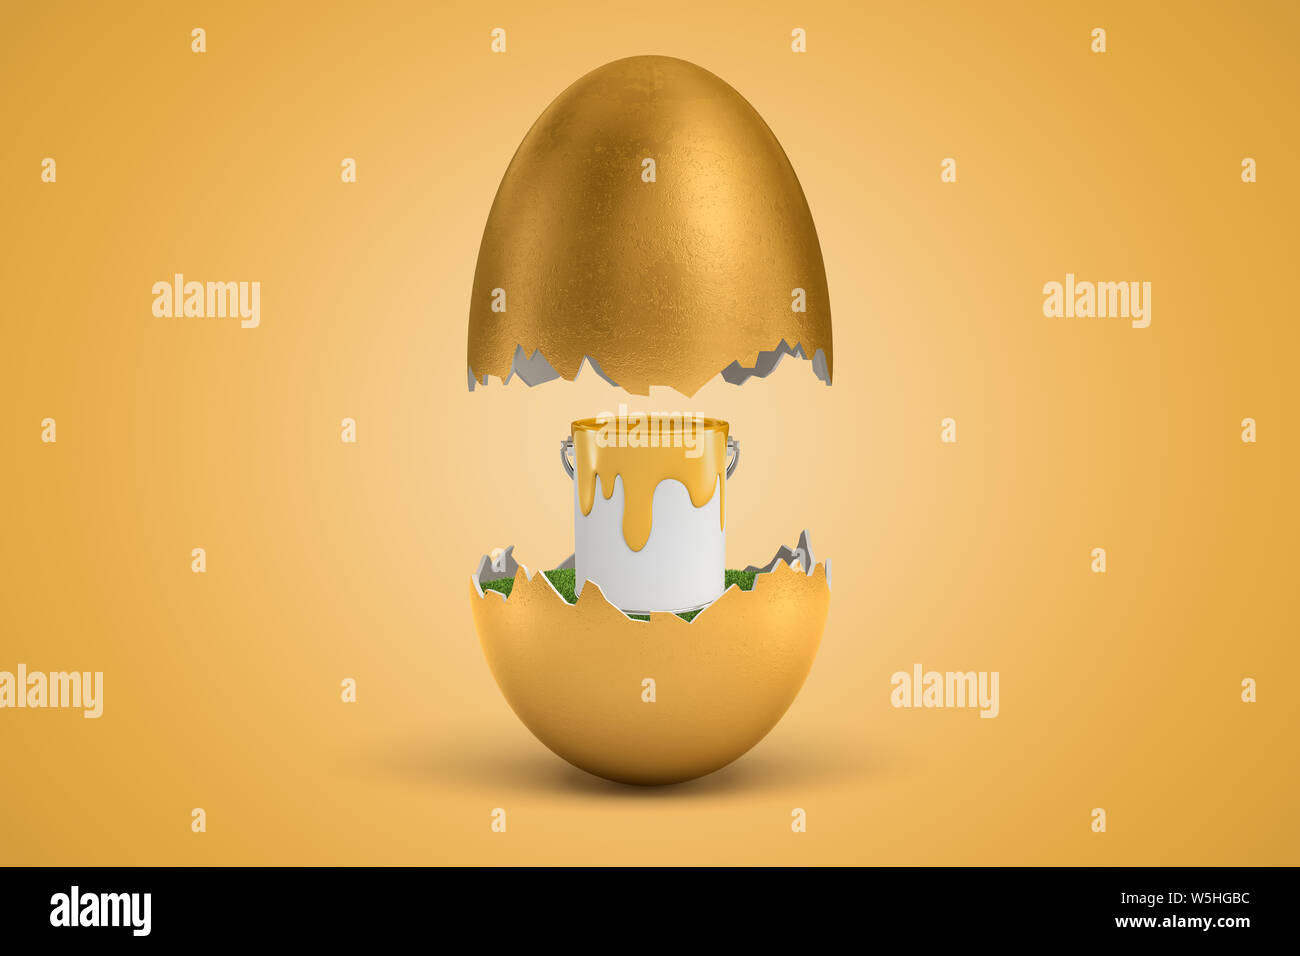 Download 3d Rendering Of Yellow Paint Bucket Hatching Out Of Golden Egg On Yellow Background Stock Photo Alamy PSD Mockup Templates